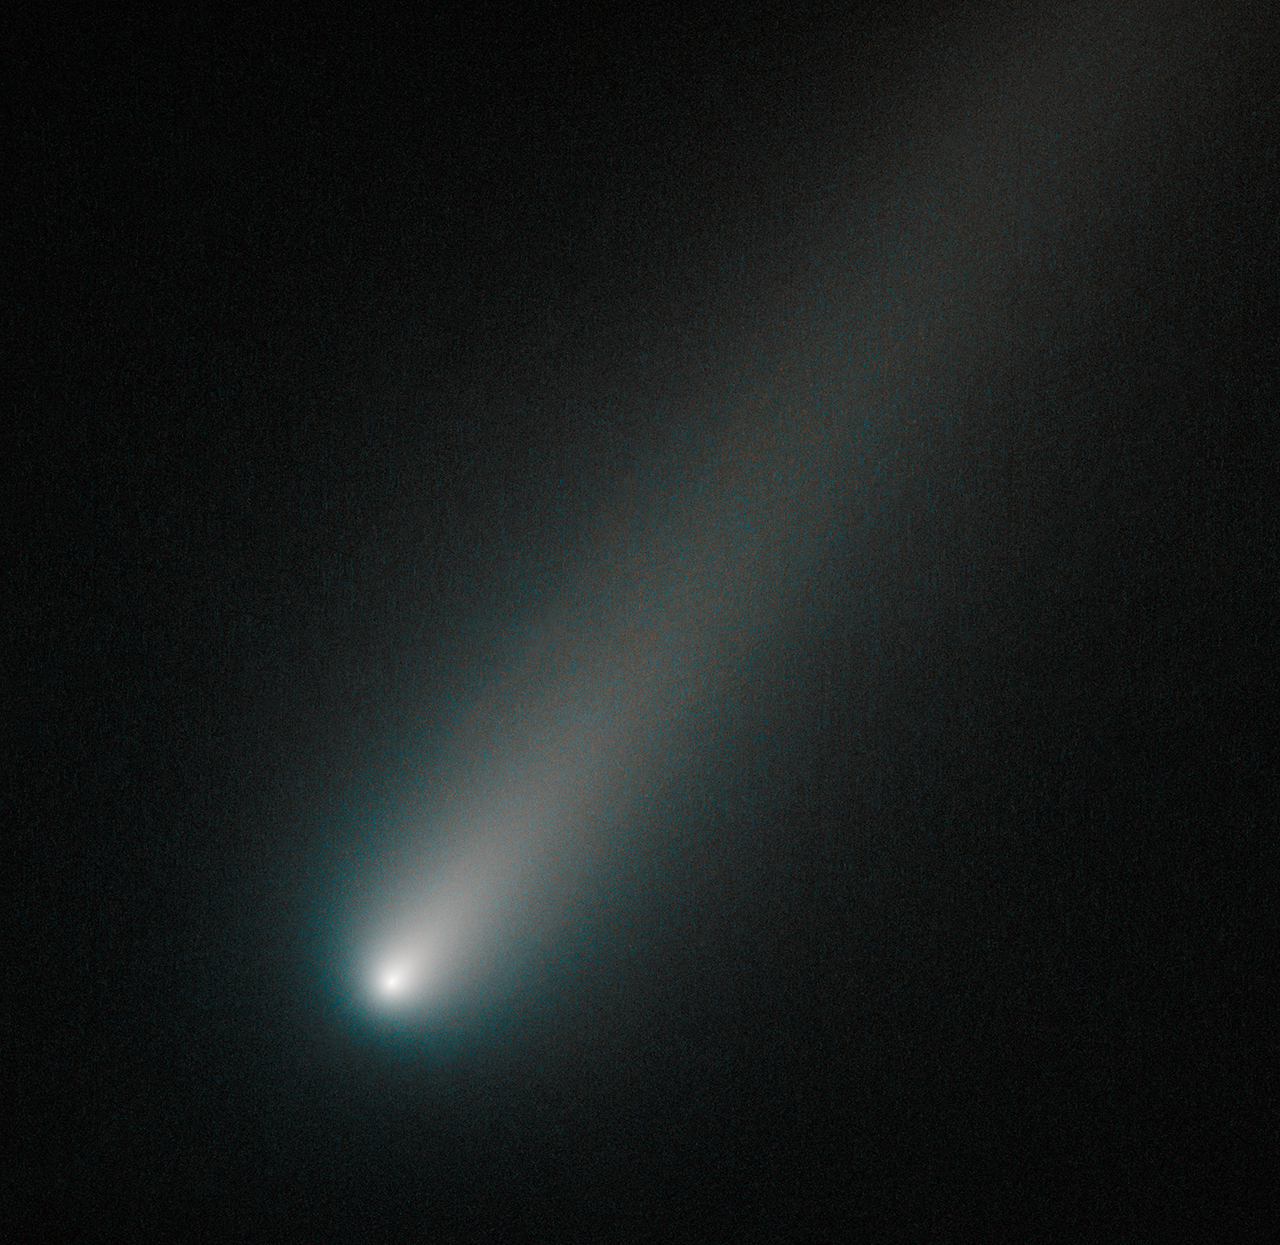 October 17, 2013: A new image of the sunward plunging Comet ISON taken by NASA's Hubble Space Telescope on October 9, 2013, suggests that the comet is intact despite some predictions that the fragile icy nucleus might disintegrate as the Sun warms it. The comet will pass closest to the Sun on November 28.
